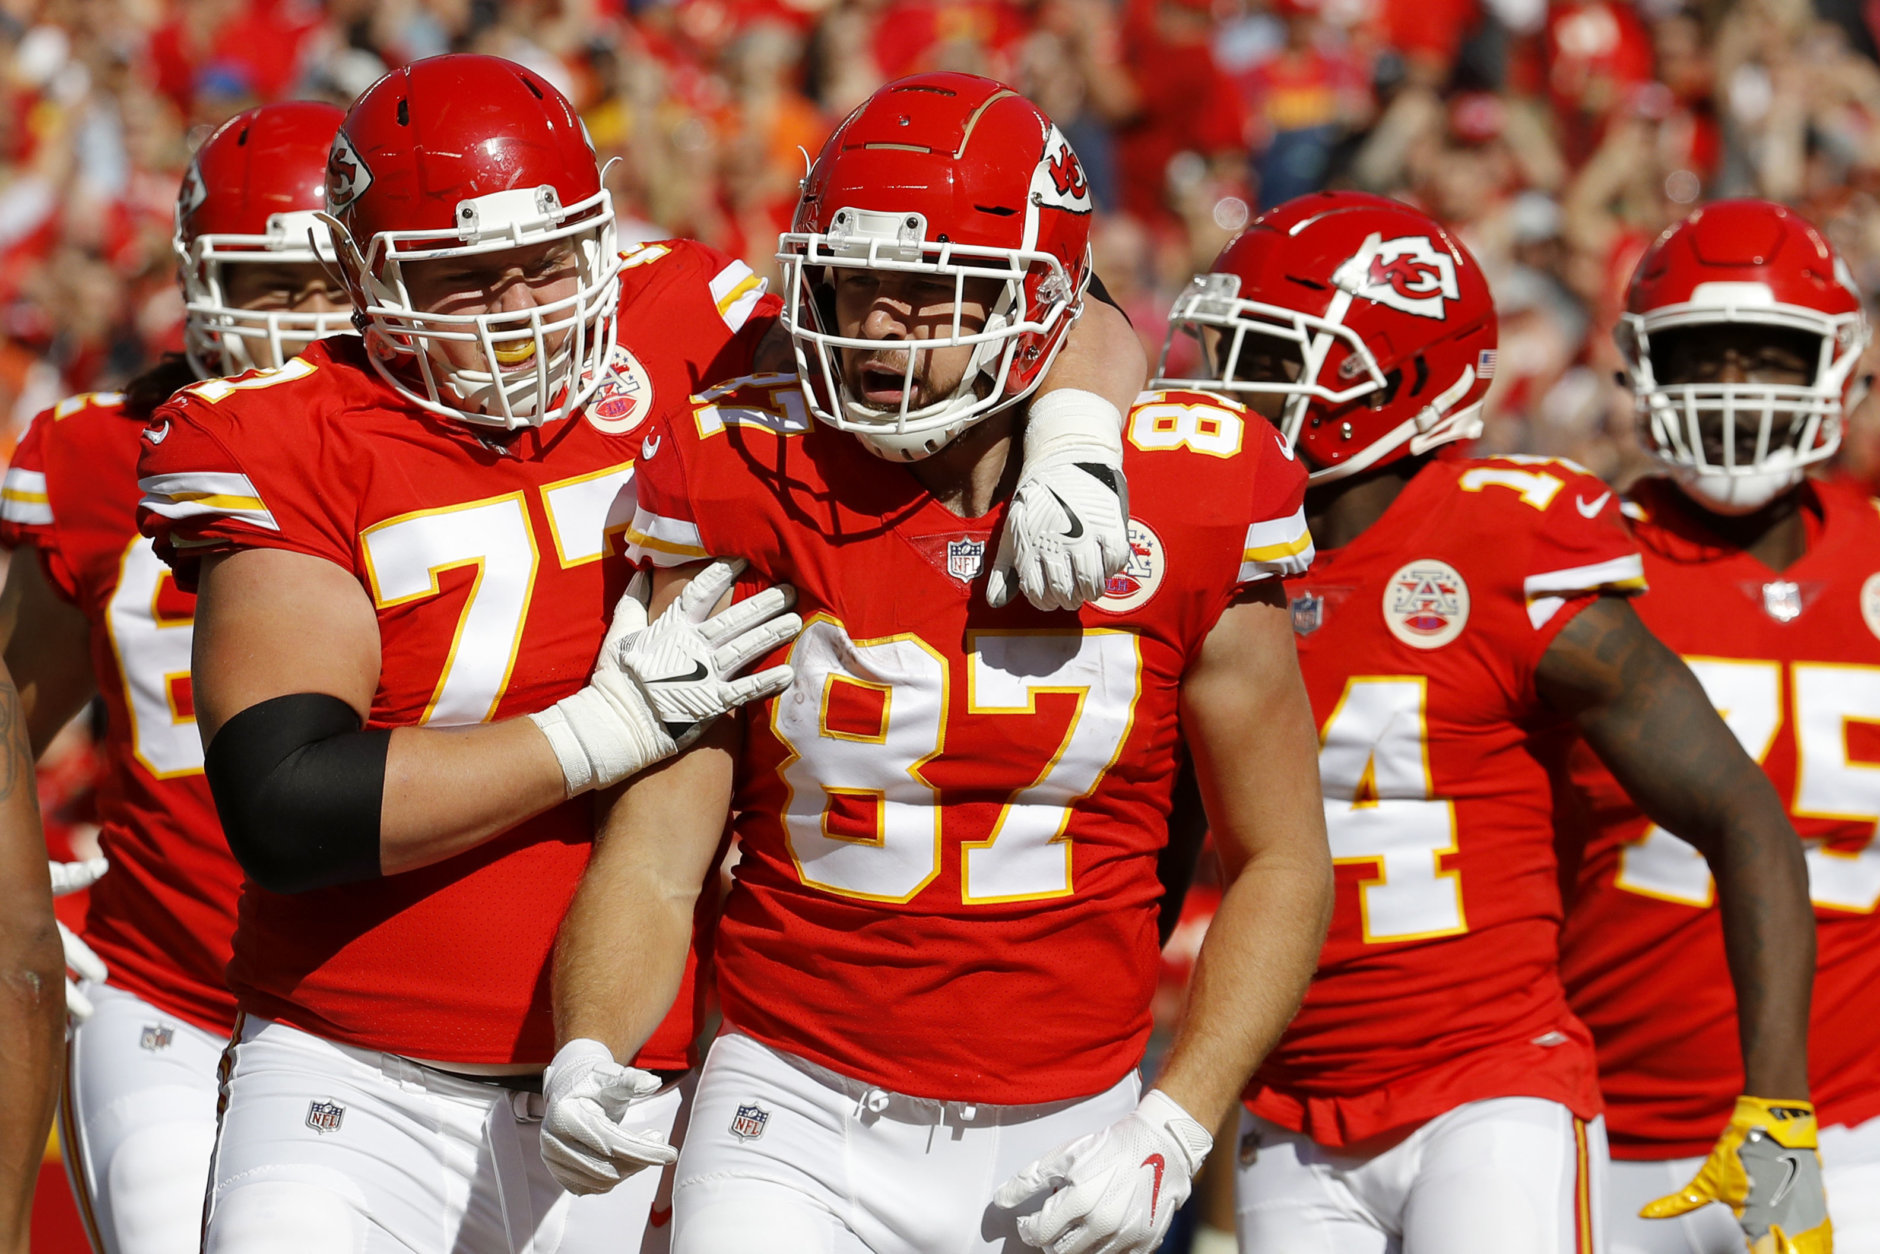 Kansas City Chiefs tight end Travis Kelce (87) celebrates a touchdown in front of offensive lineman Andrew Wylie (77) and wide receiver Sammy Watkins (14) during the first half of an NFL football game against the Denver Broncos in Kansas City, Mo., Sunday, Oct. 28, 2018. (AP Photo/Charlie Riedel)